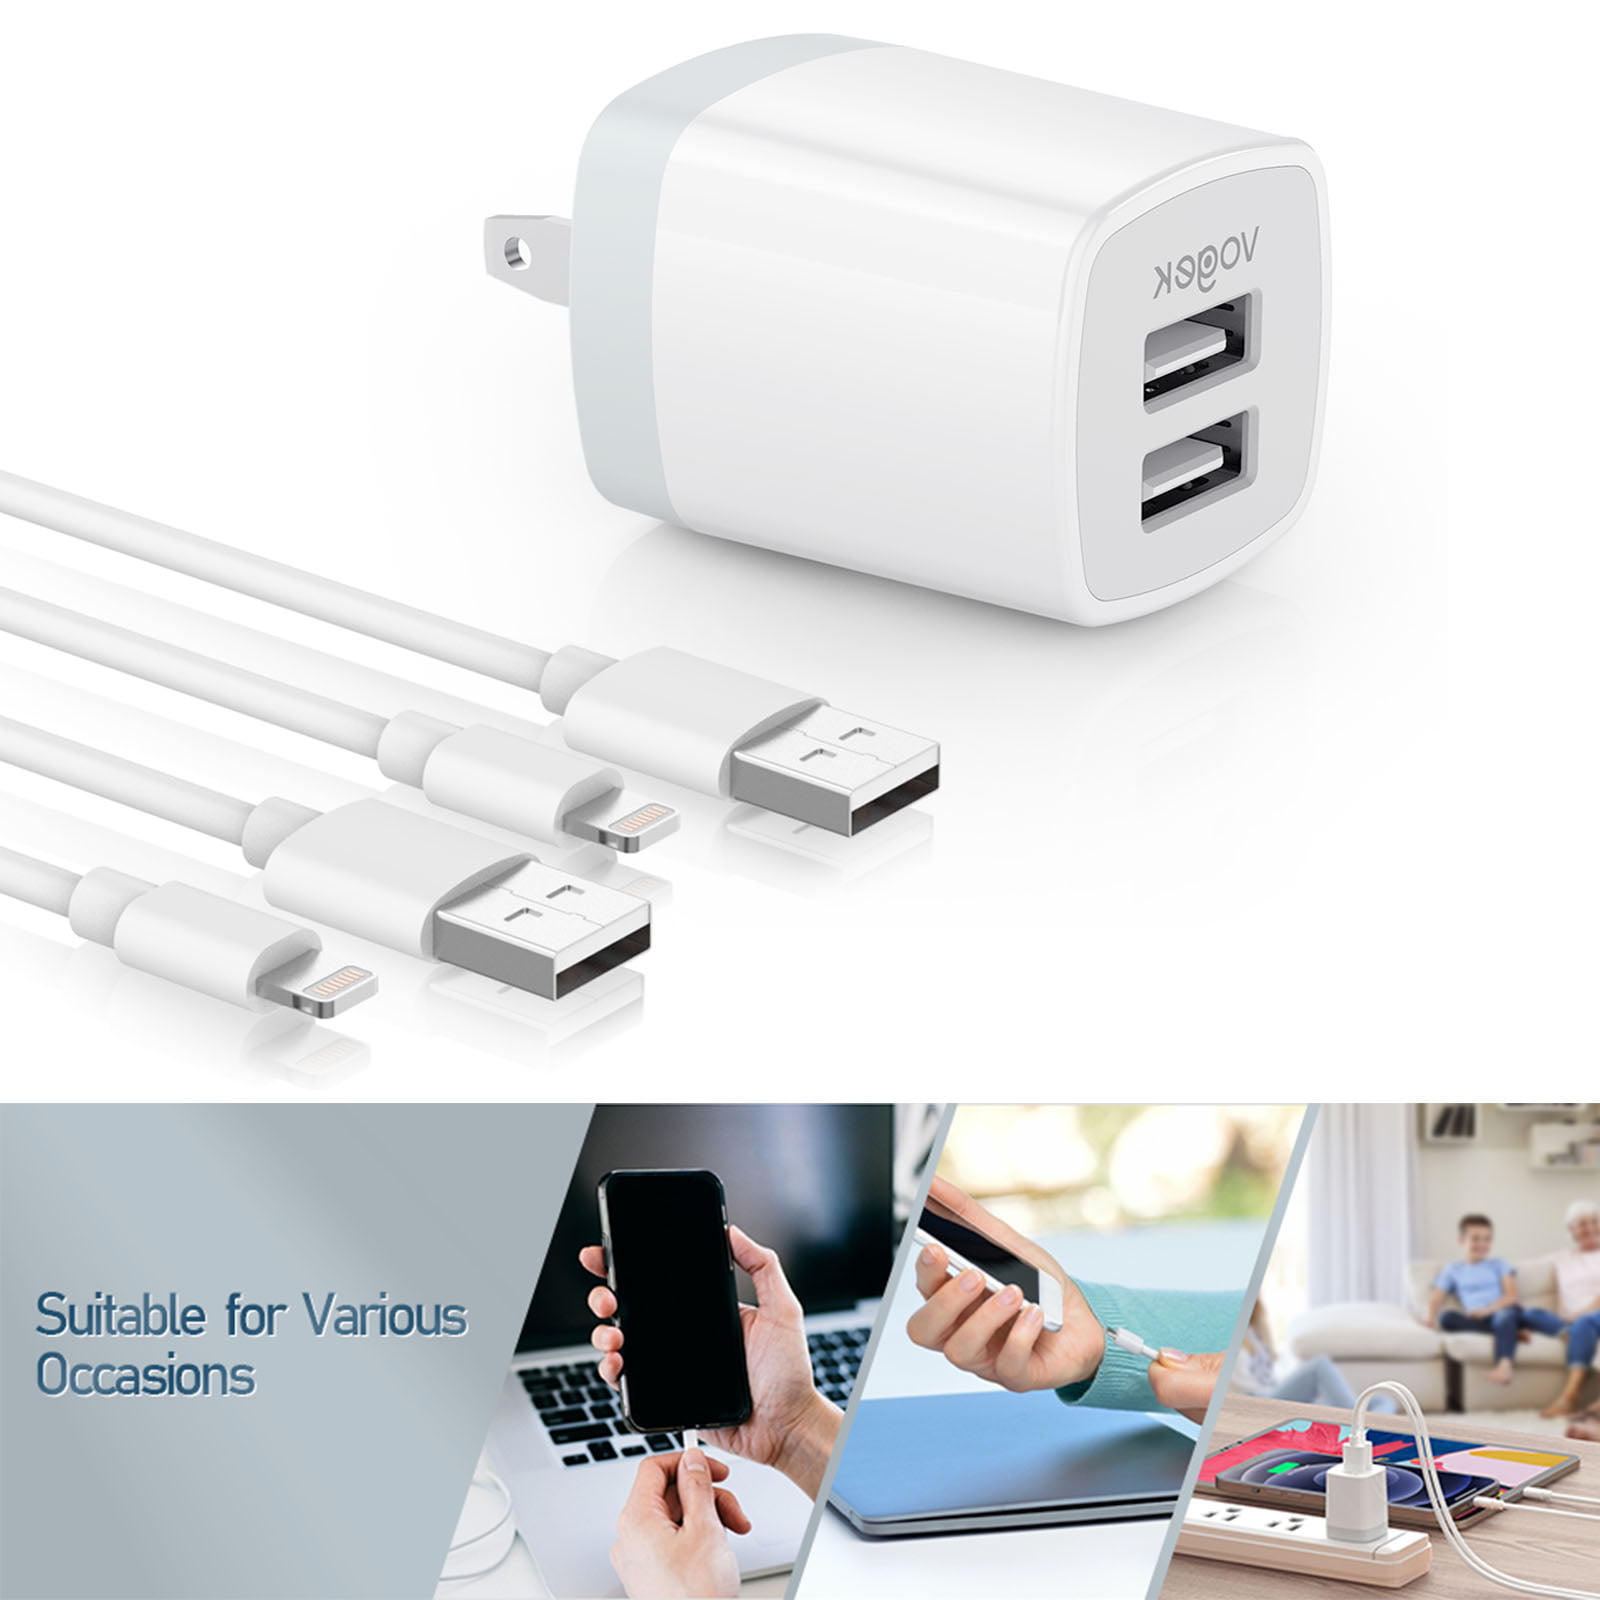 Seenda 2 Pack Usb Charger Block For Iphone 12 Dual Port 15 5w Usb Power Adapter Fast Charge With Portable Compatible With Iphone 12 12 Pro Walmart Com